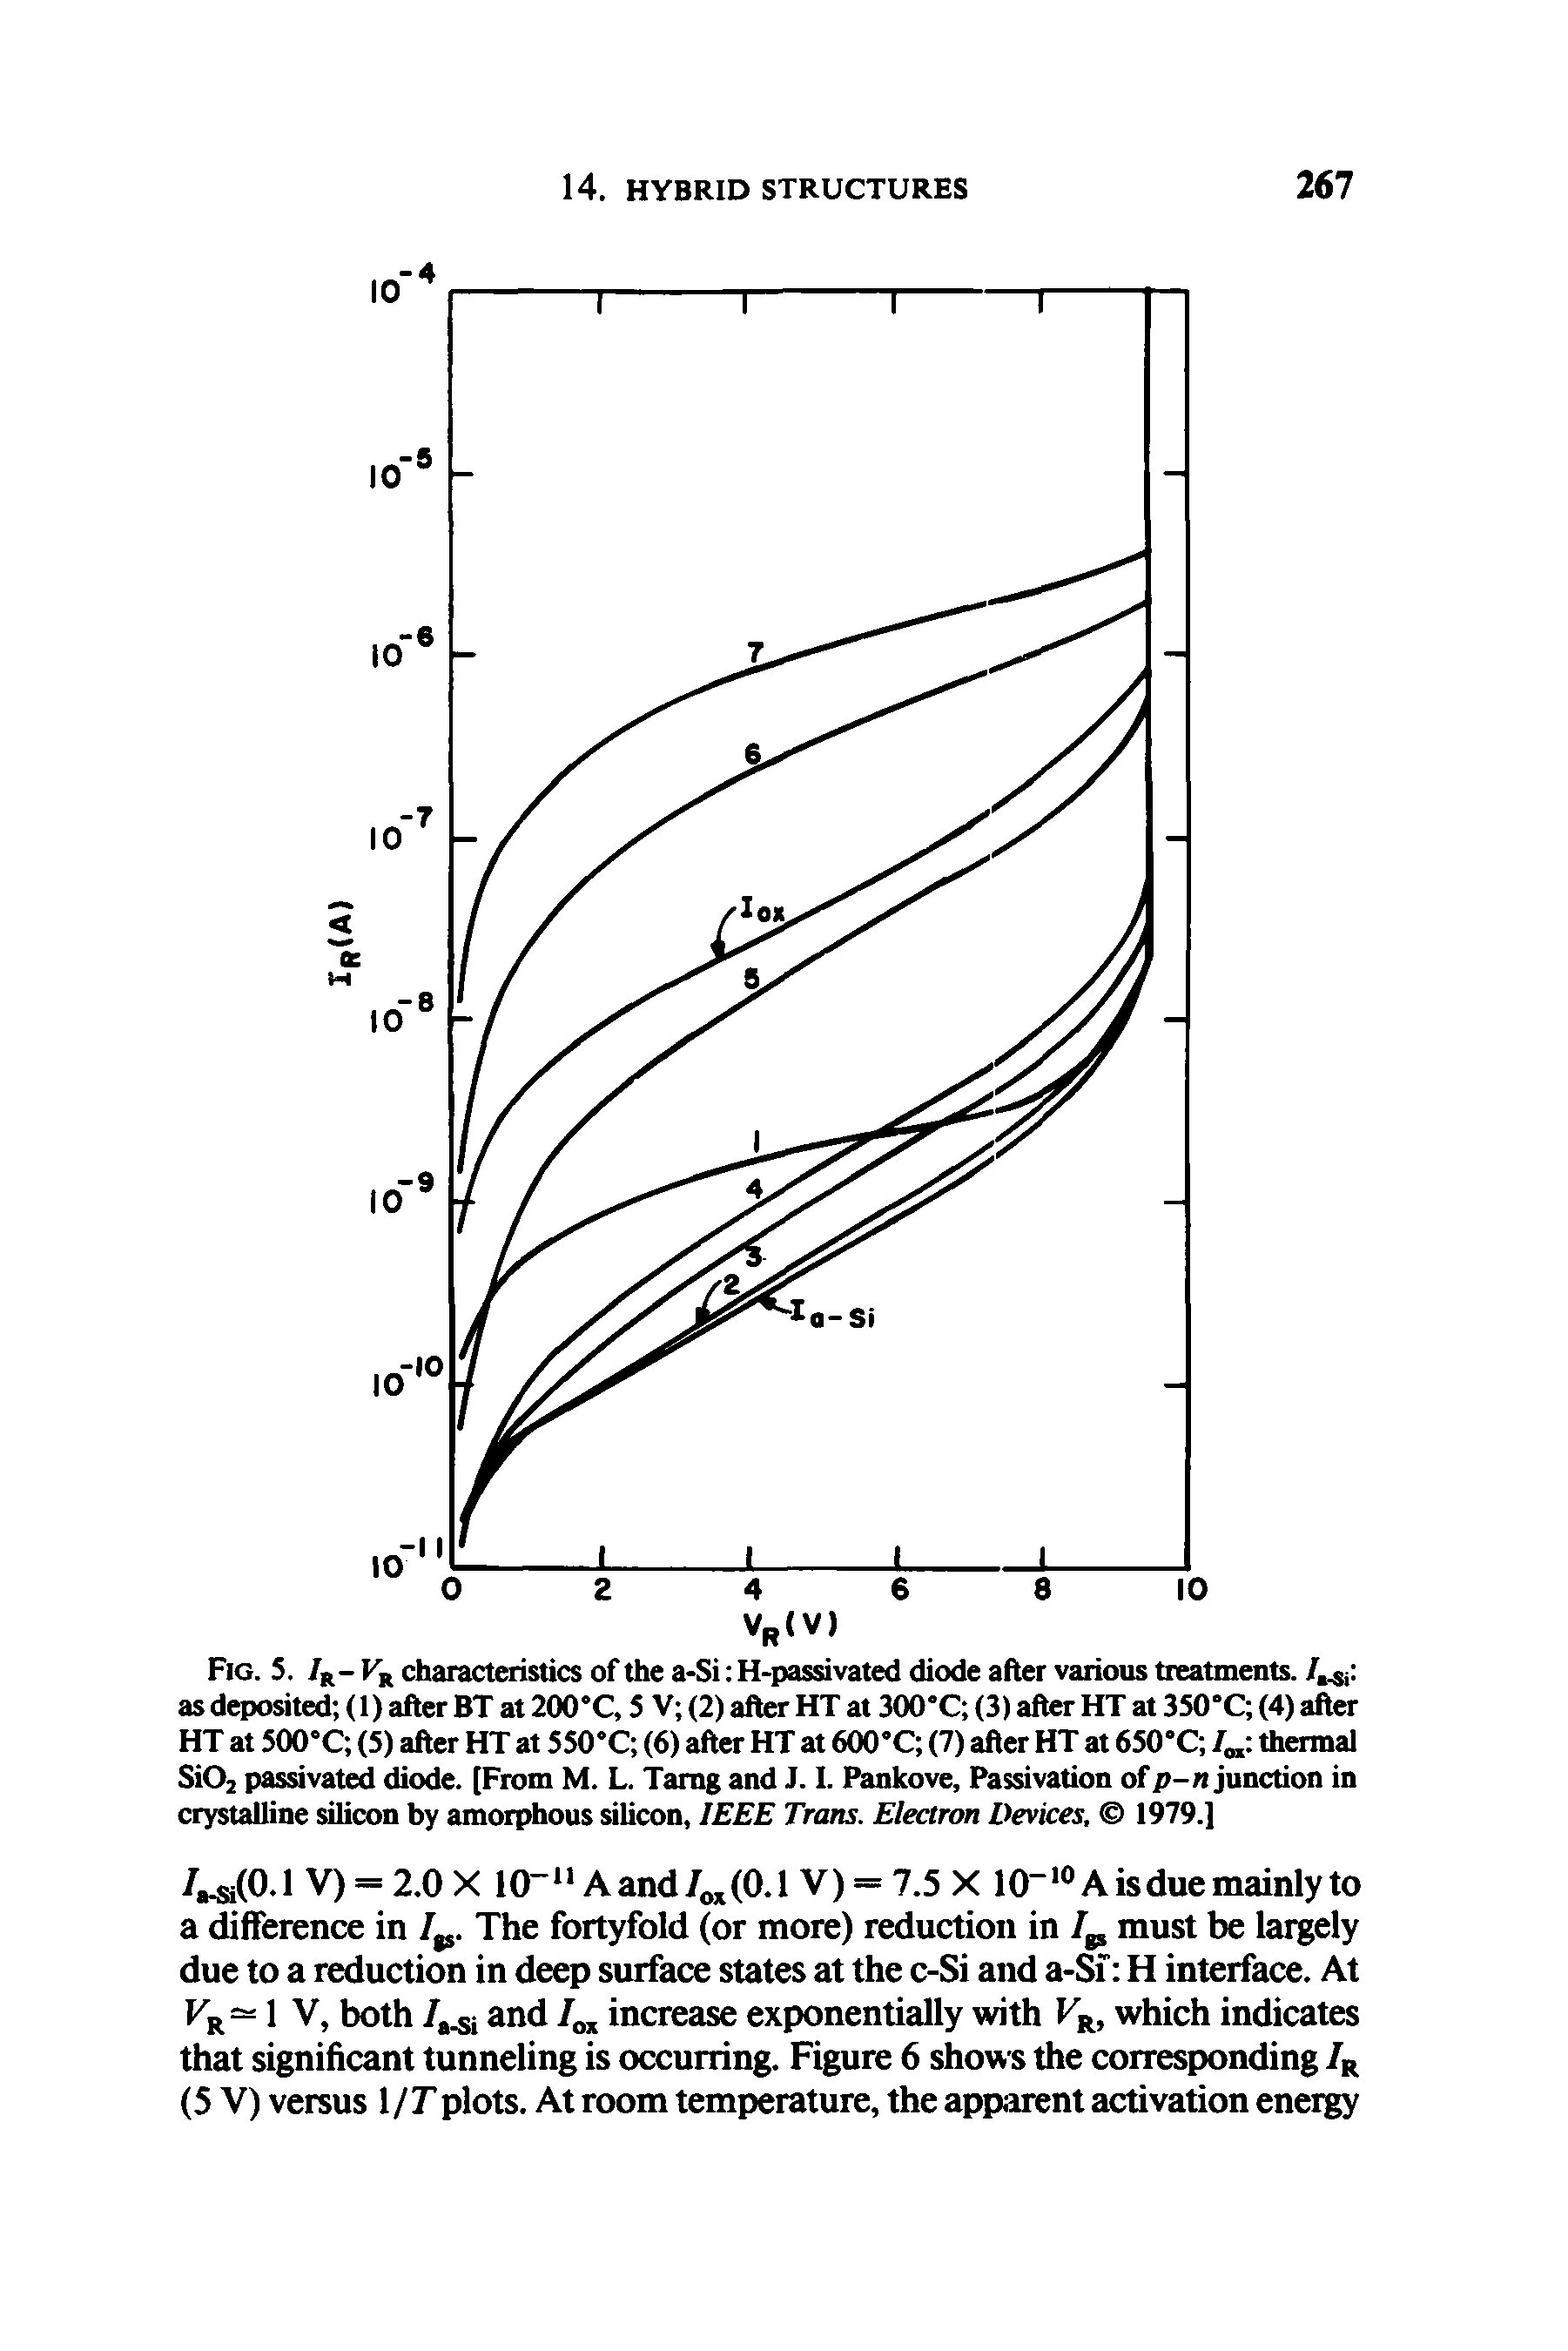 Fig. S. 7r-Fr characteristics of the a-Si H-passivated diode after various treatments. as deposited (1) after BT at 200X, 5 V (2) after HT at 300°C (3) after HT at 350 C (4) after HT at 500°C (5) after HT at 550X (6) after HT at 600°C (7) after HT at 650°C / thermal Si02 passivated diode. [From M. L. Tarng and J. I. Pankove, Passivation of p-n junction in crystalline silicon by amorphous silicon, IEEE Trans. Electron Devices, 1979.]...